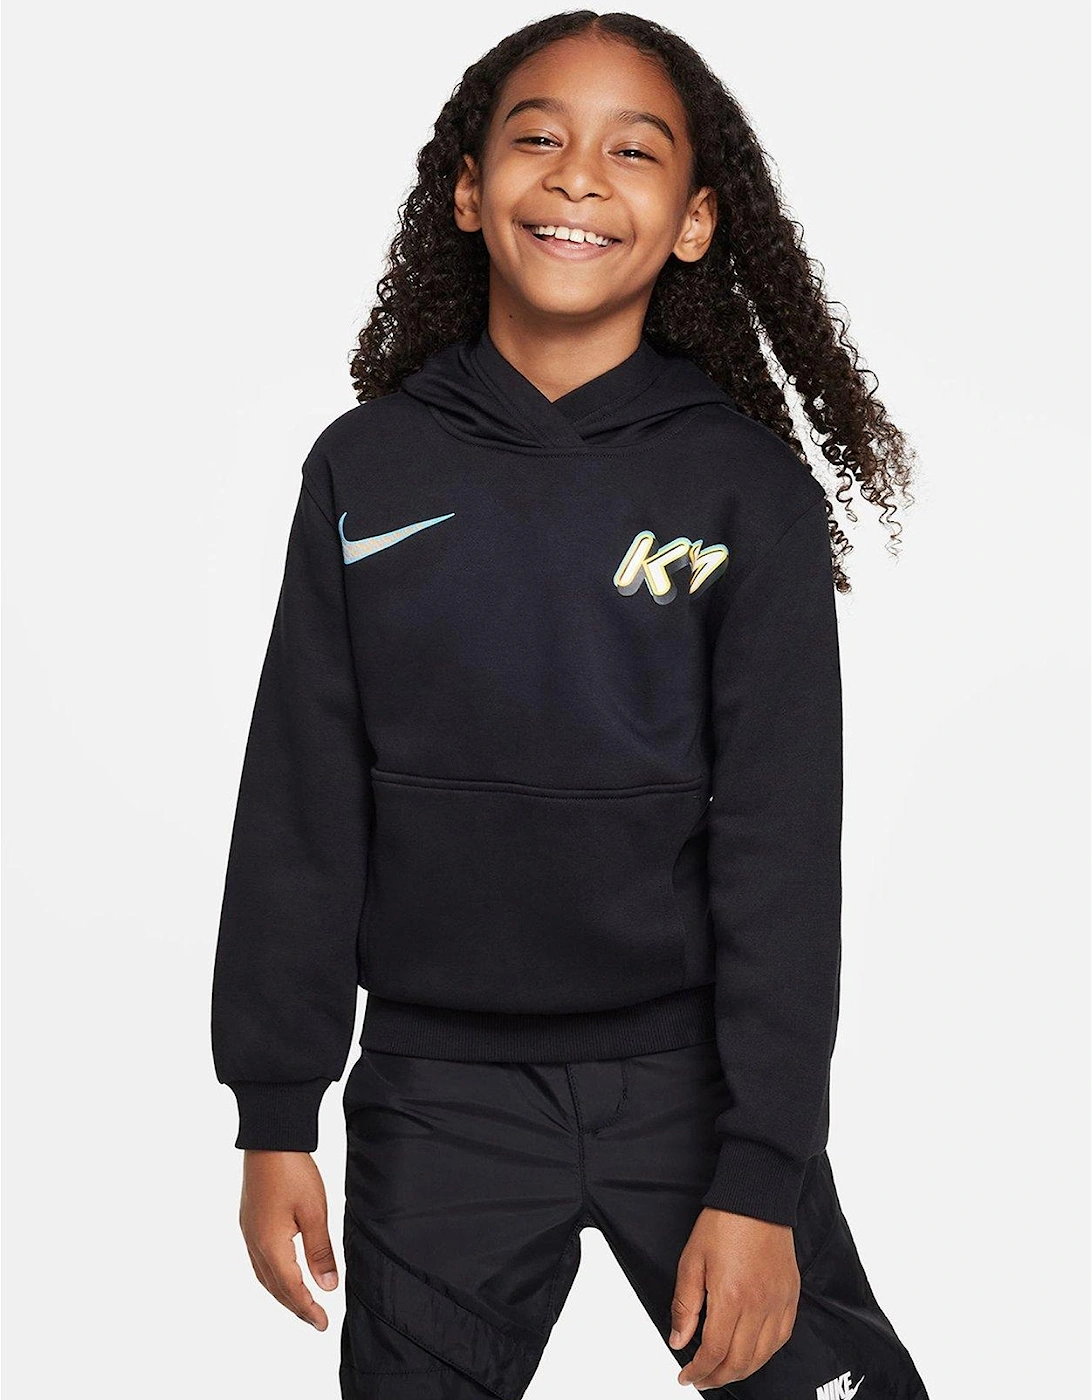 Youth KM Player Hoodie - Black, 6 of 5